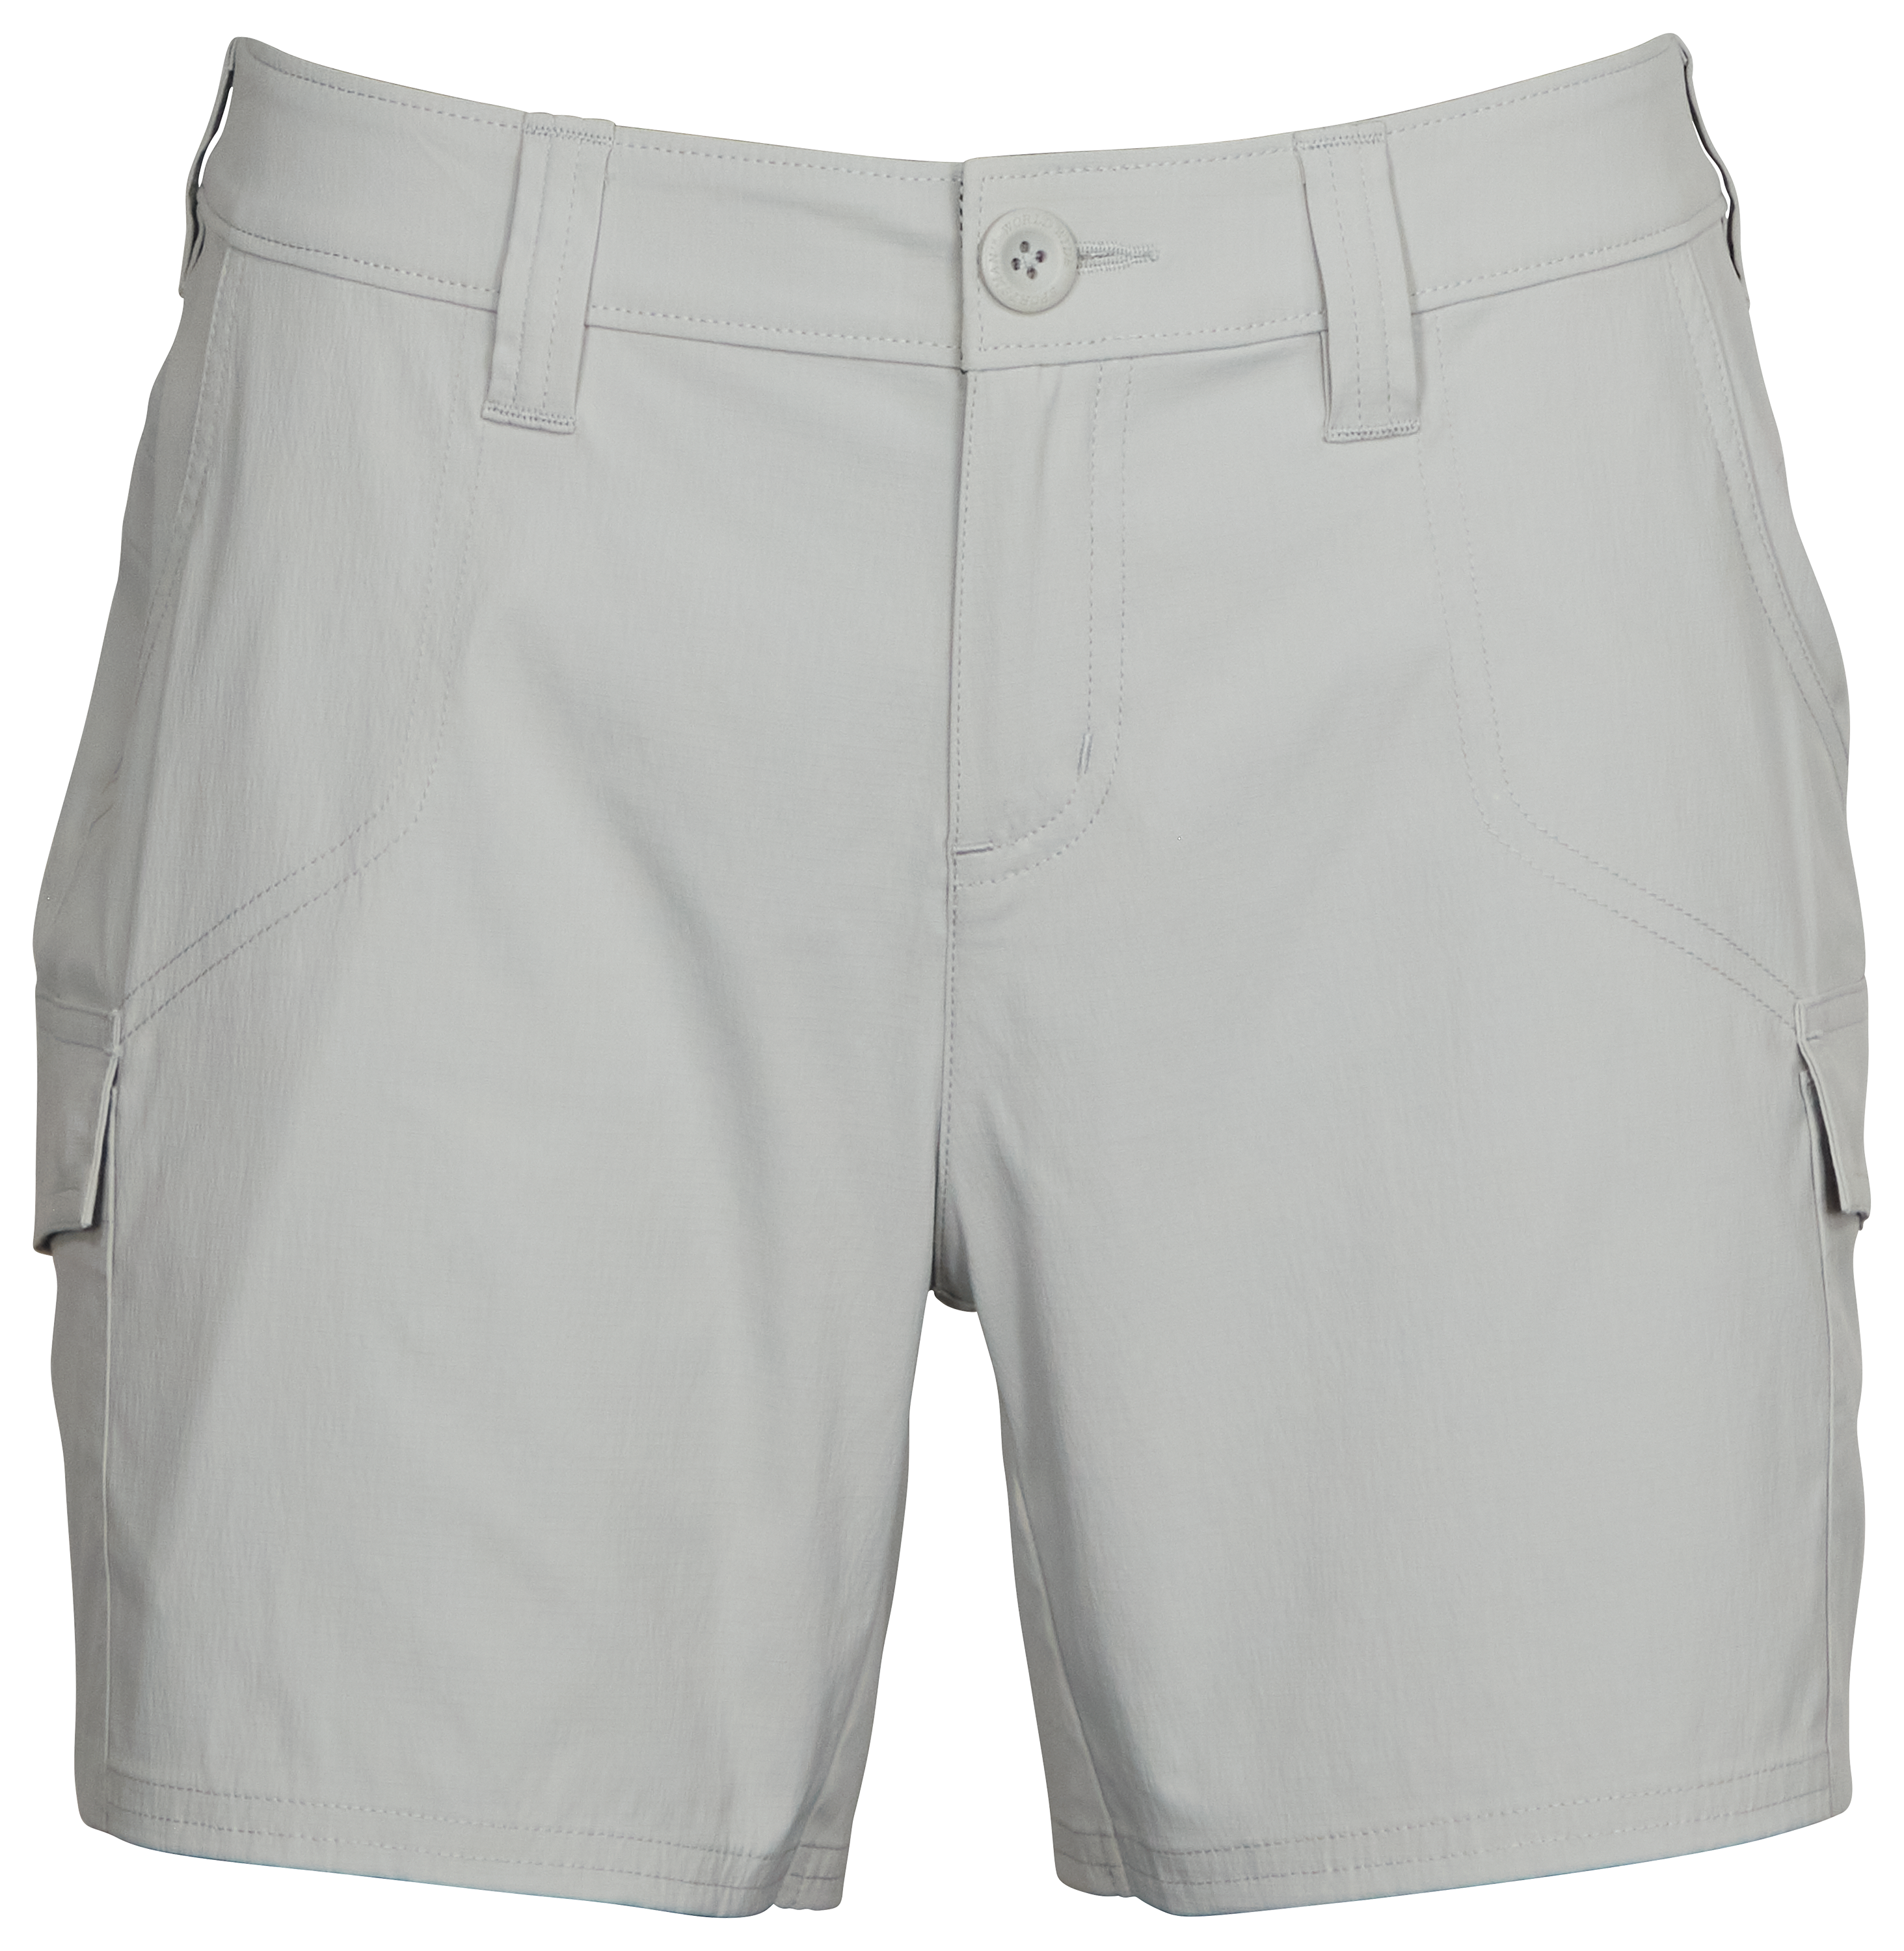 World Wide Sportsman Ripstop Cargo Shorts for Ladies - High Rise - 22W